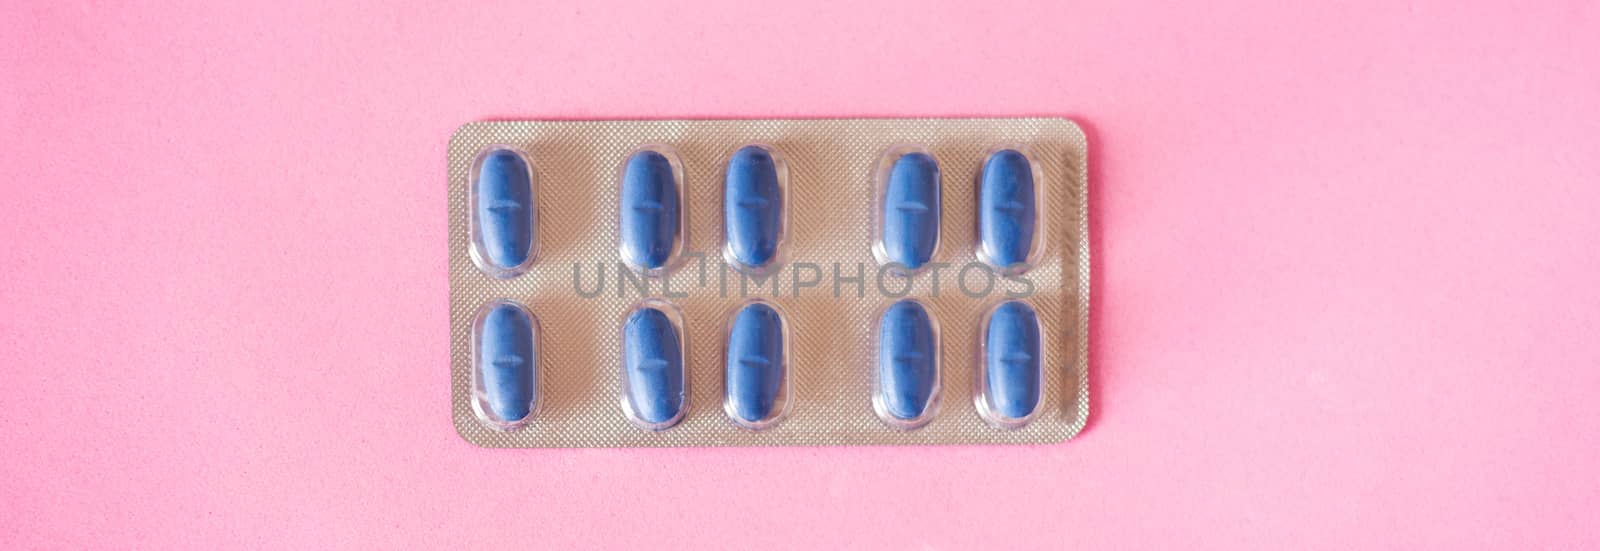 Blue medical pills on pink background by chandlervid85